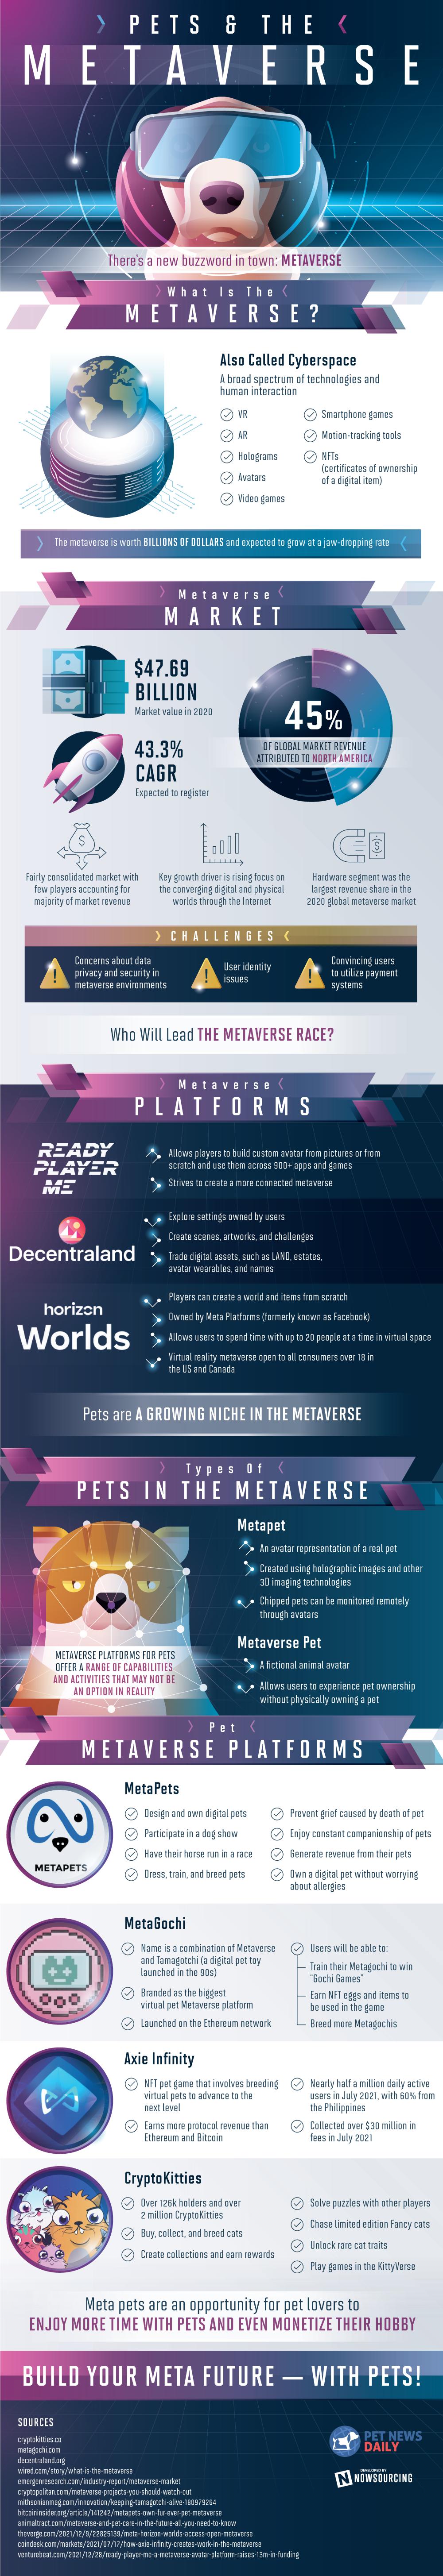 Are Digital Collectibles the Next Horizon For the Metaverse? 